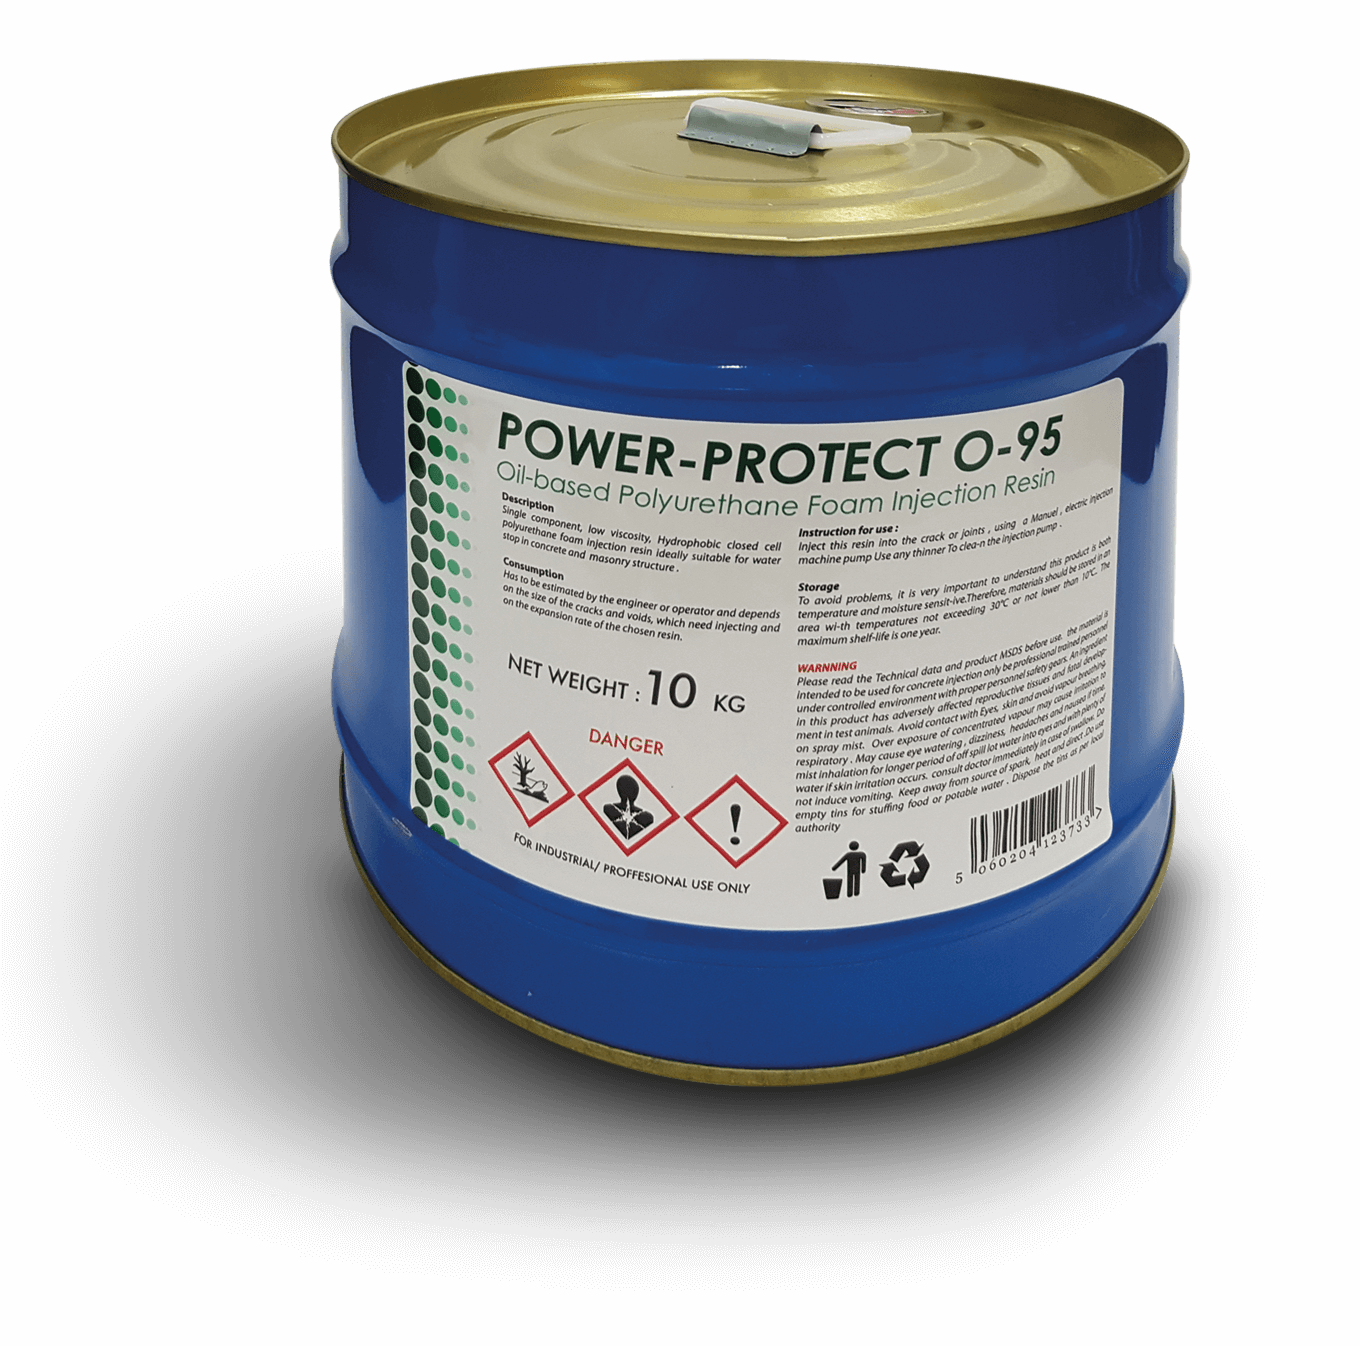 Power-Protect O-95 is an Oil-based Polyurethane Foam Injection Resin